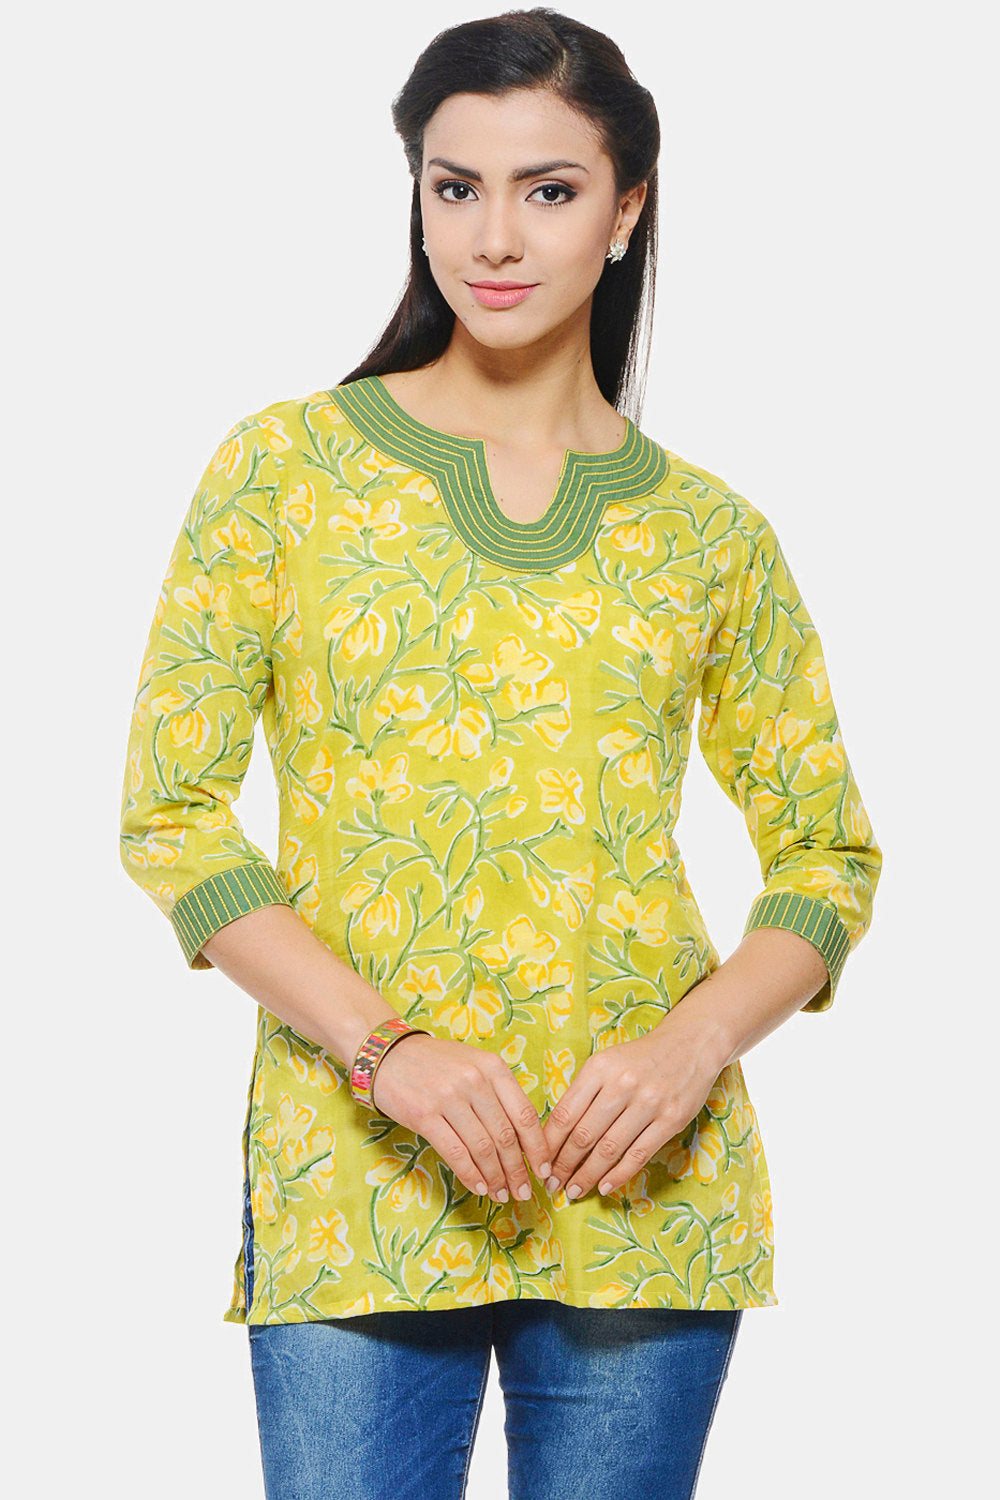 Hand Block Printed Indian Kurti in pastel green floral design with Embroidery on neck and sleeves